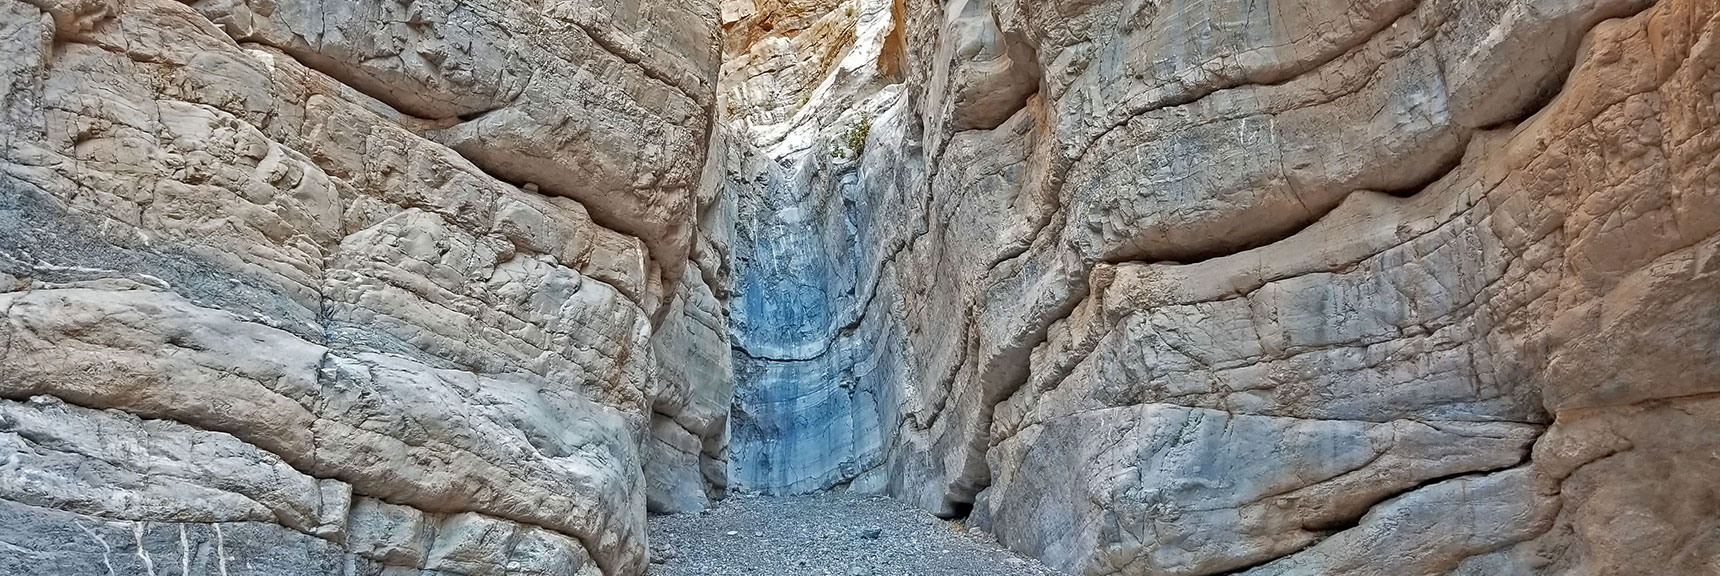 20ft Impassible Cliff Marks the Upper End of Lower Fall Canyon | Fall Canyon | Death Valley National Park, California